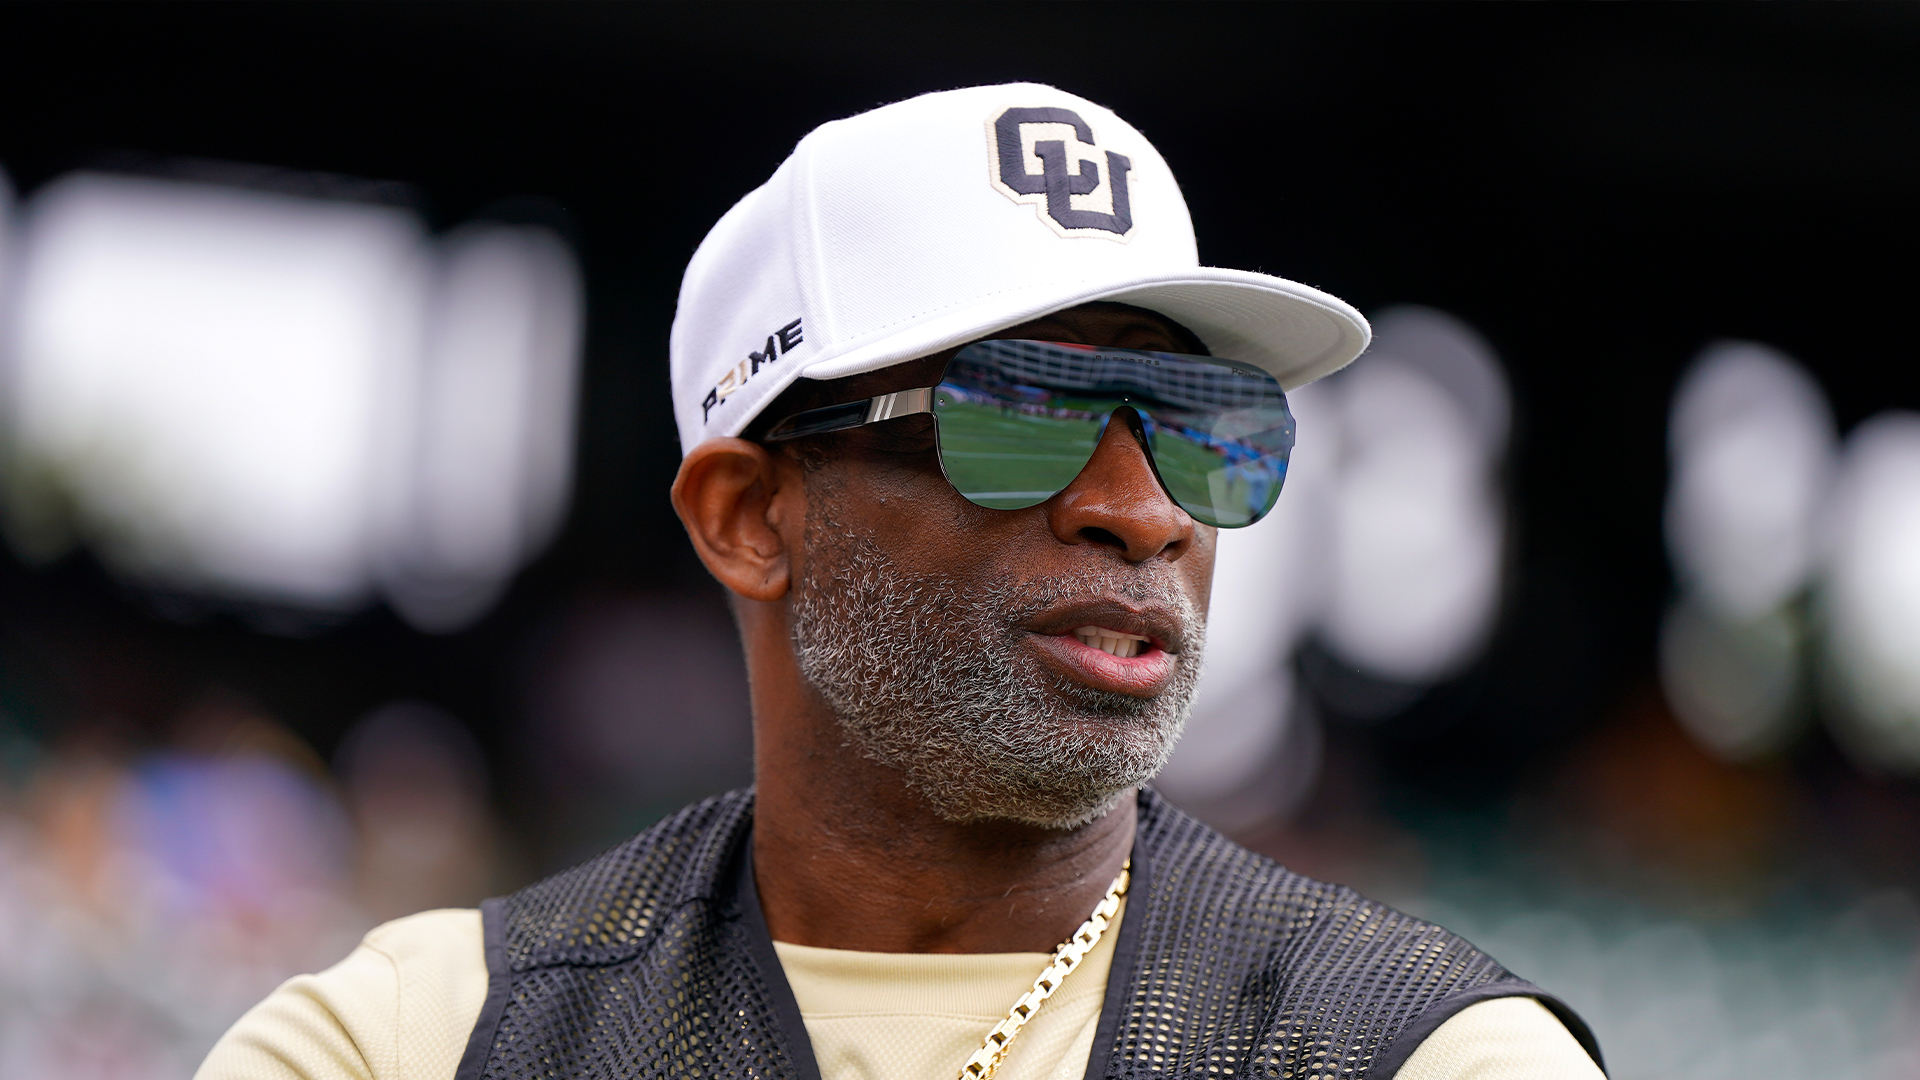 Deion Sanders On Generating $113.2M In Economic Value From 6 University of Colorado Boulder Home Games — 'Everybody Making Money'